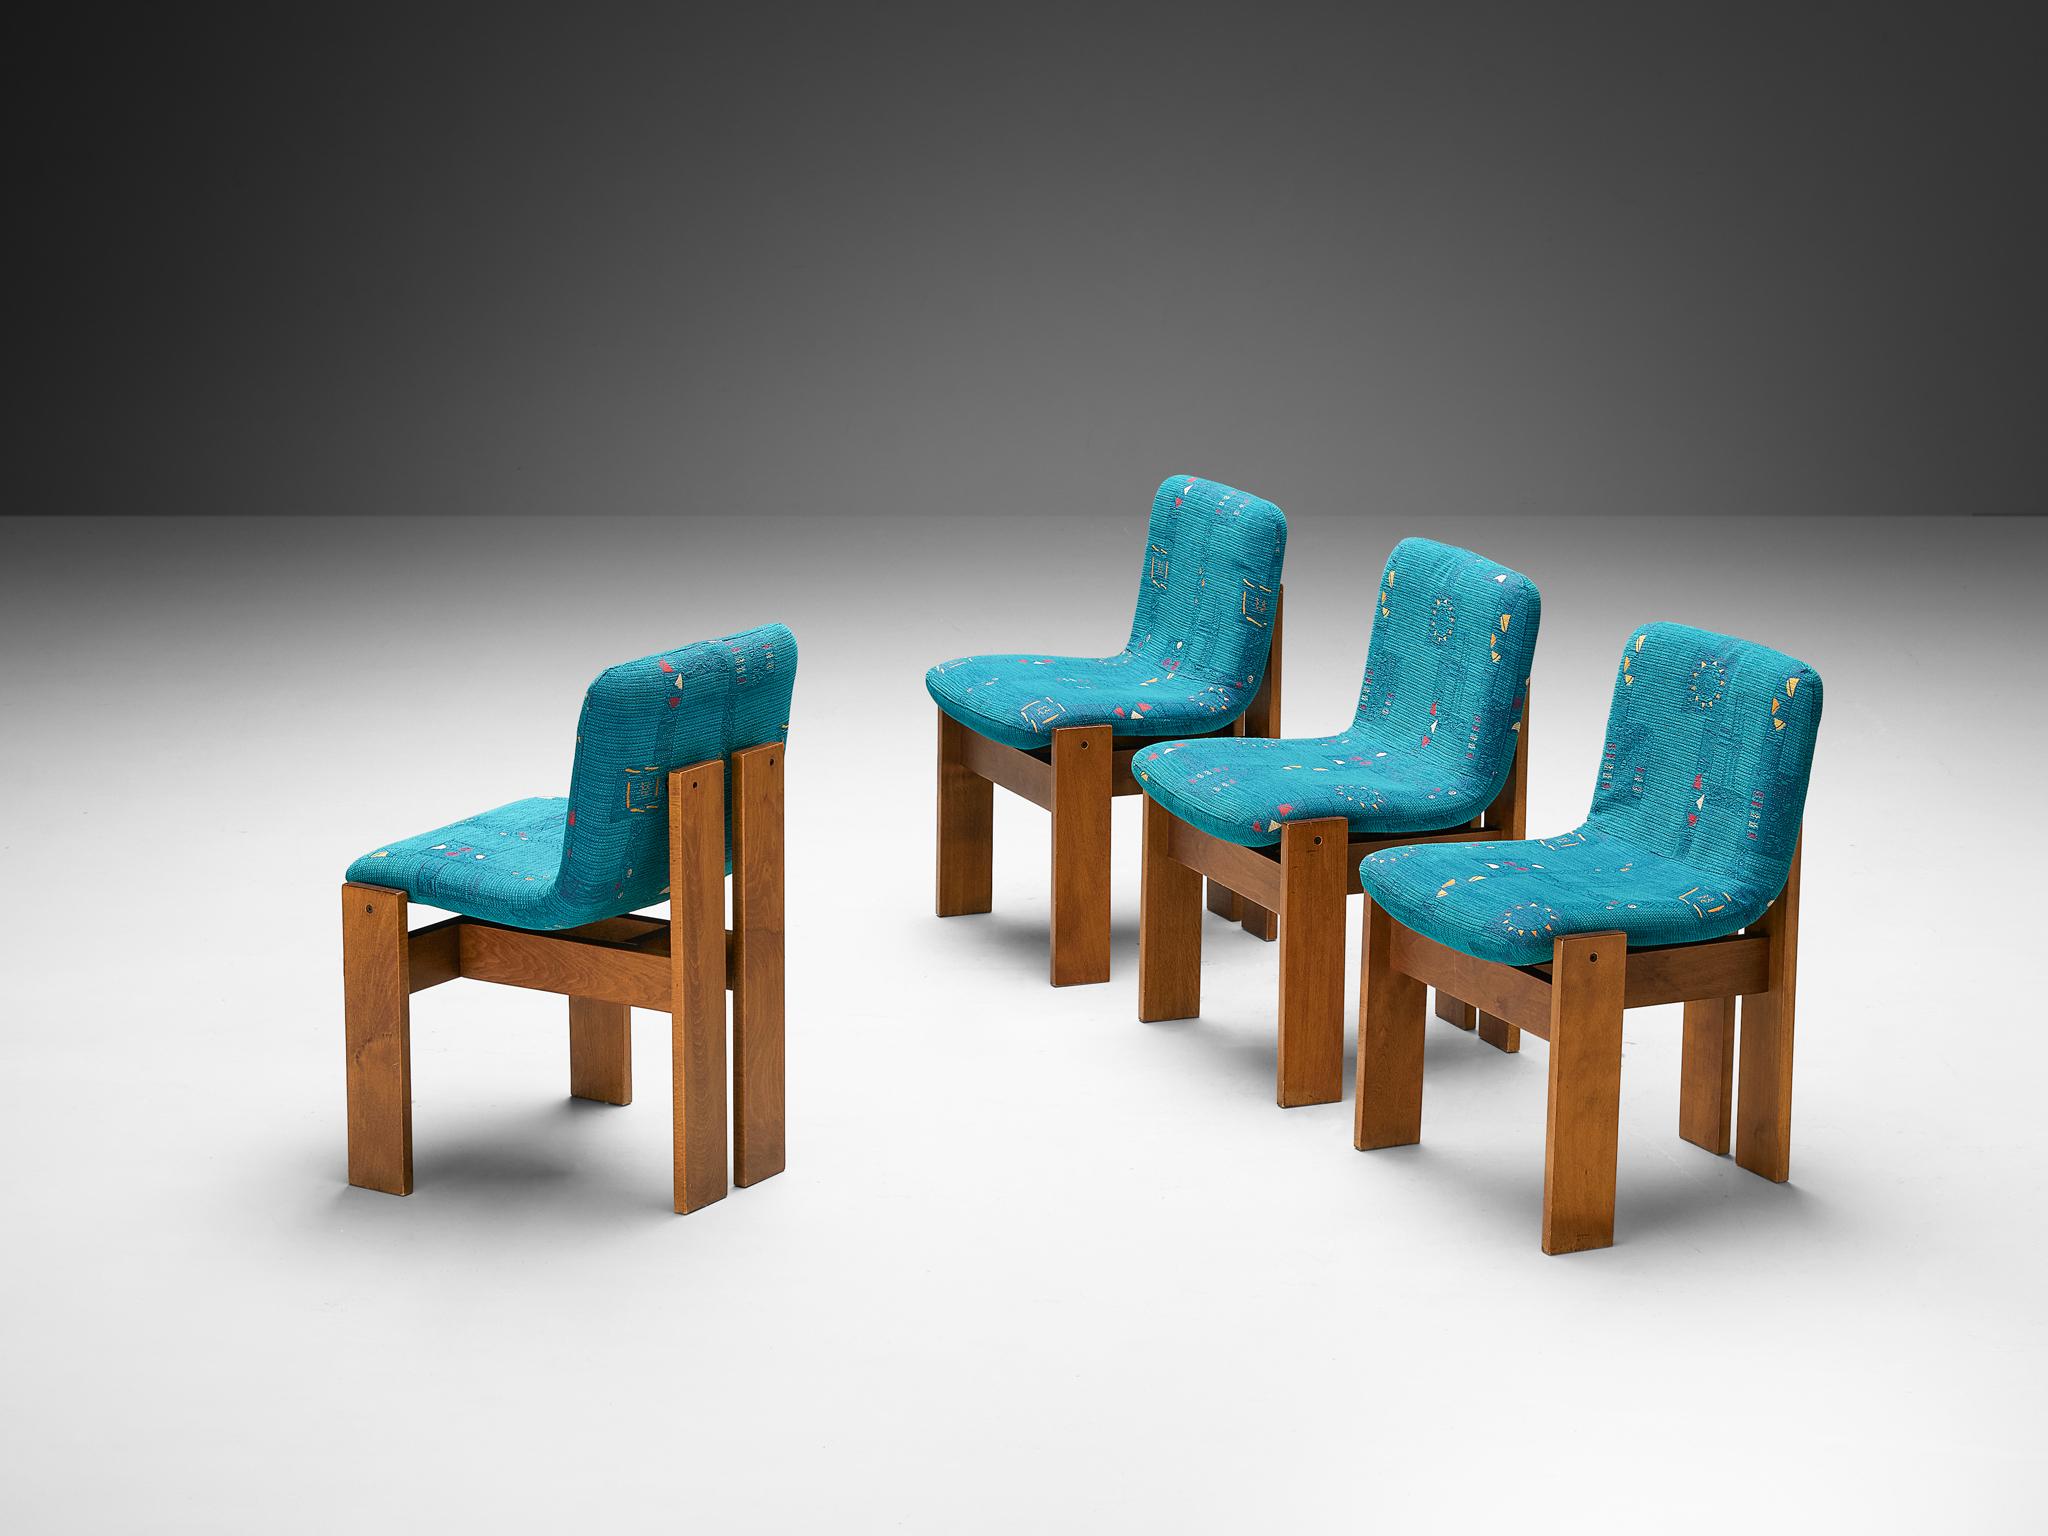 Set of four dining chairs, wood, fabric, Italy, 1960s 

These Italian-made dining chairs echo the distinct styles of Augusto Savini’s 'Pamplona' chair (1965) and Afra & Tobia Scarpa's 'Pigreco' chair (1959-1960), but stand out with unique design